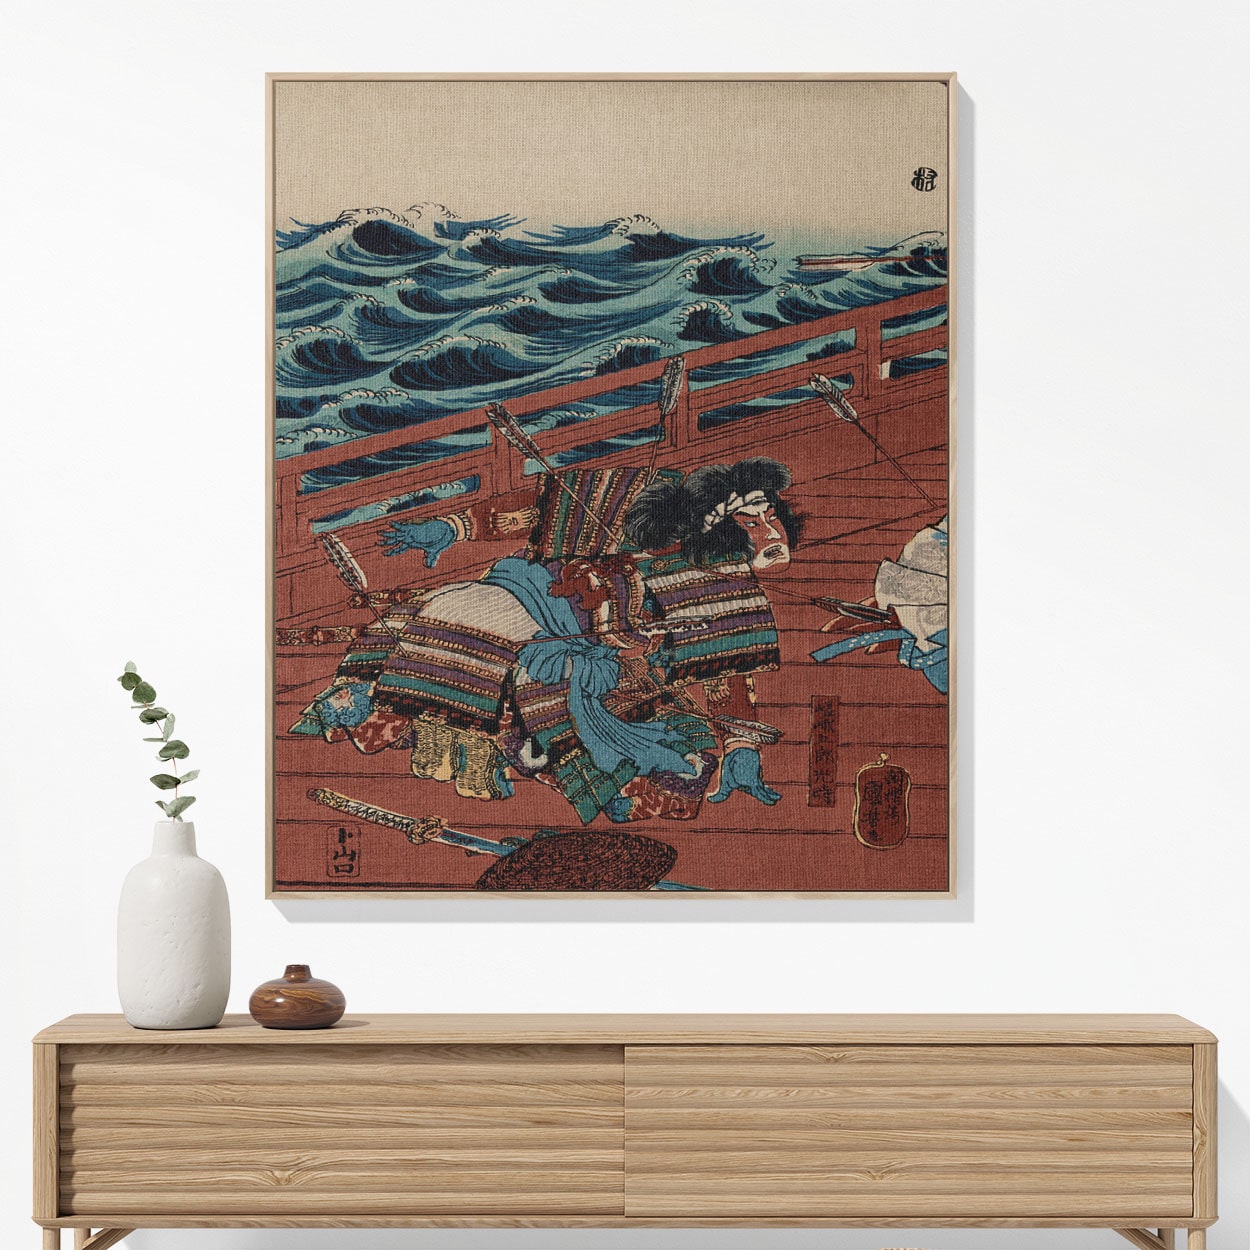 Warrior on a Boat Woven Blanket Woven Blanket Hanging on a Wall as Framed Wall Art